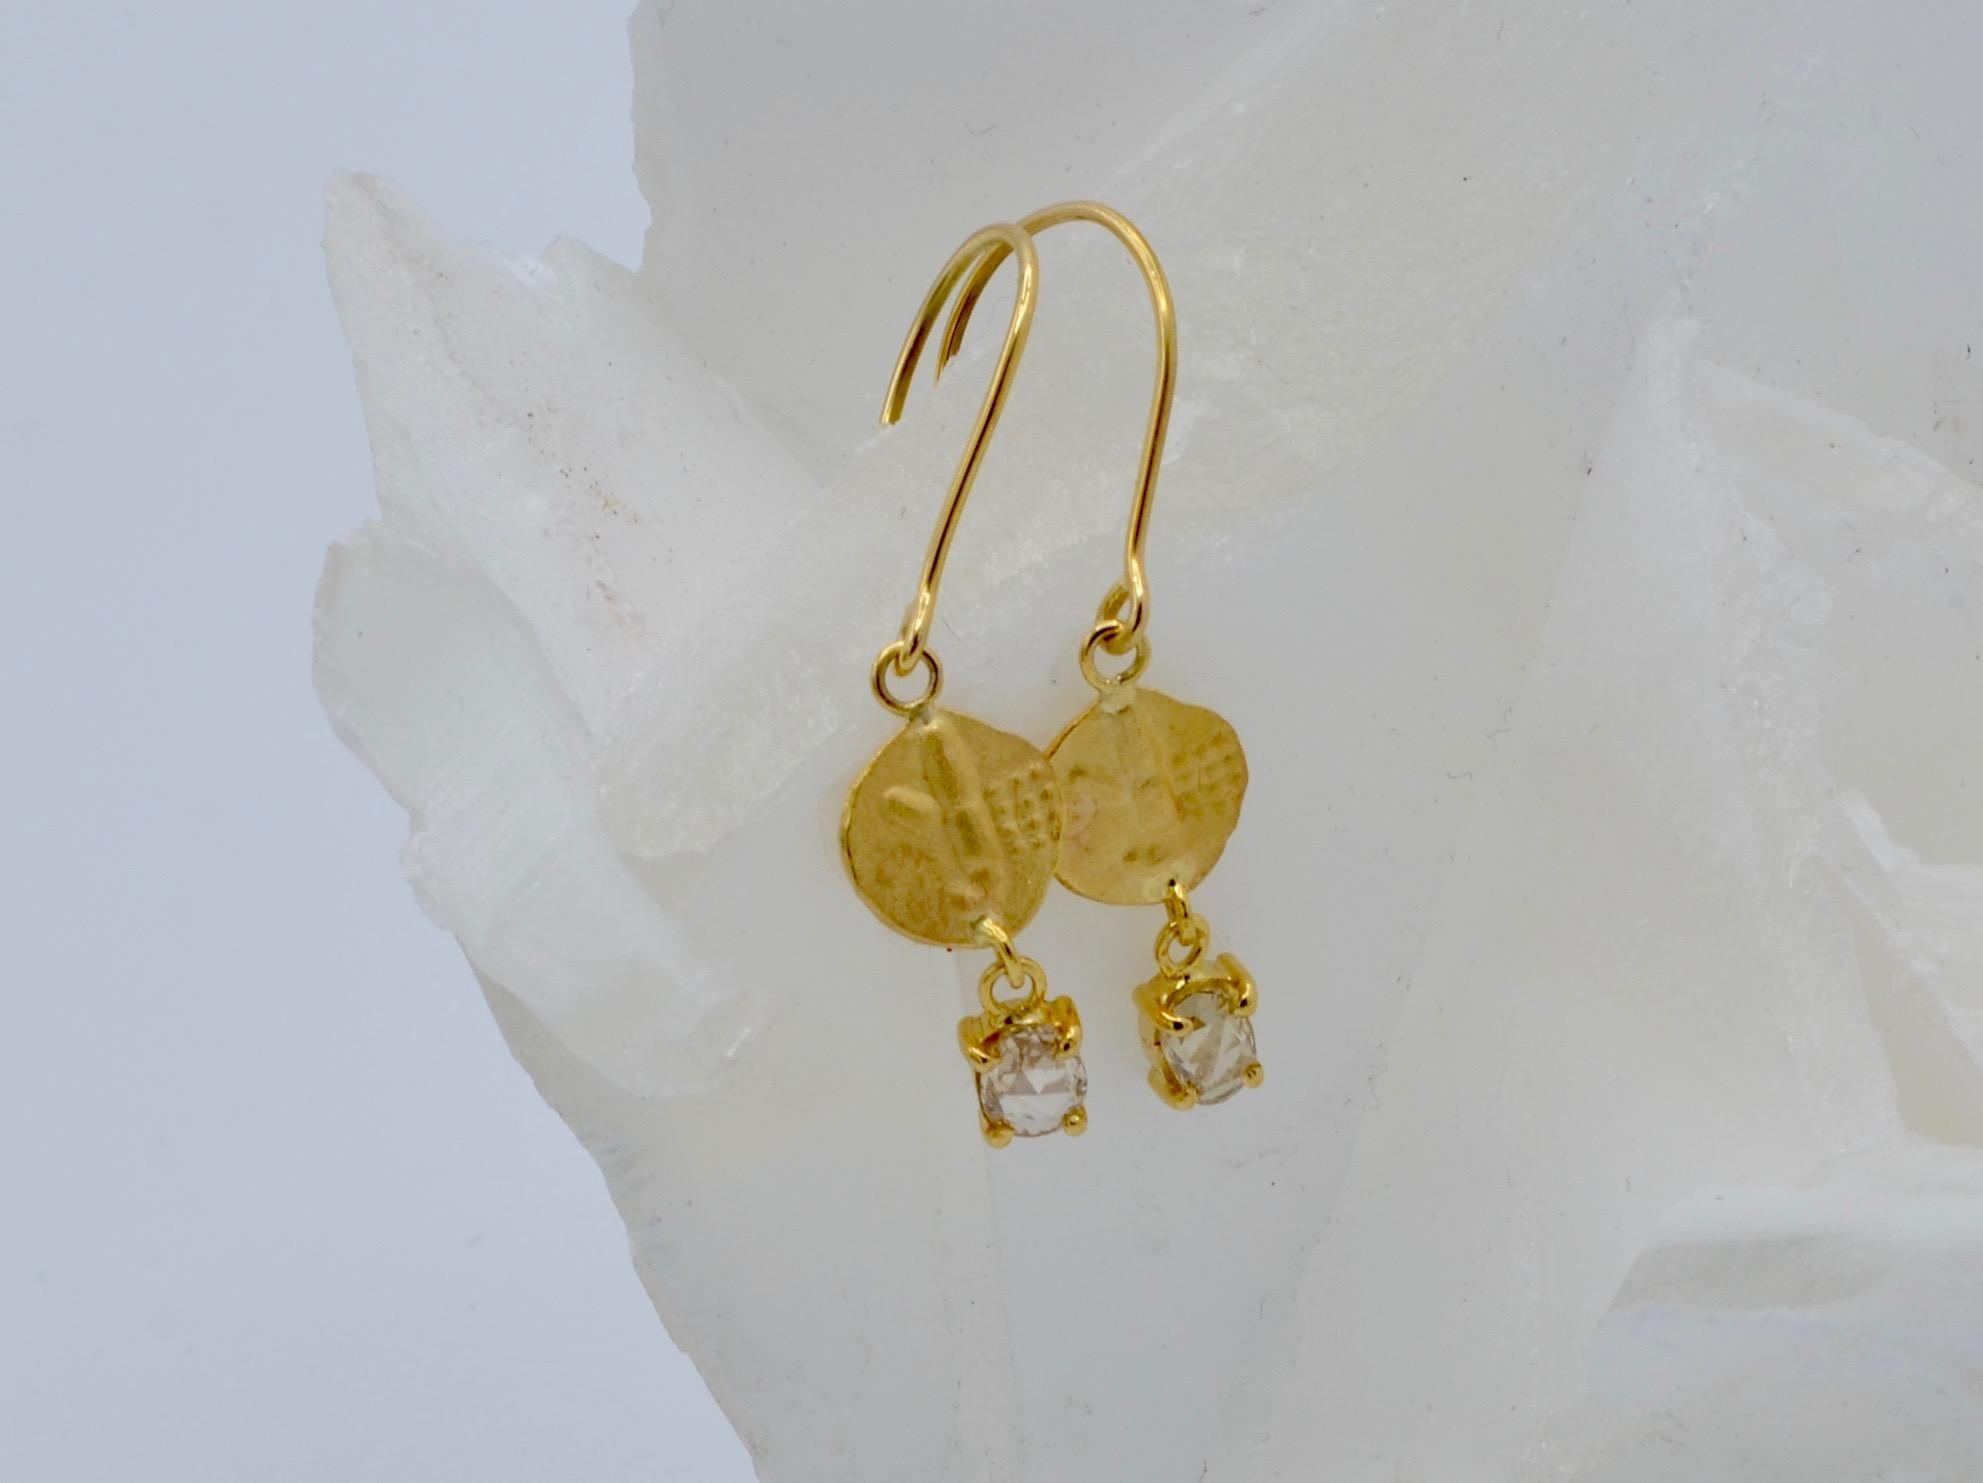 These earrings are delicate and shimmer with replica ancient 'coins' and diamond rose cut champagne drops that dazzle. The diamonds ( aprox 0.50 ct tw)  are prong set with a bezel to compliment the round 'coin'. They are the perfect combination of